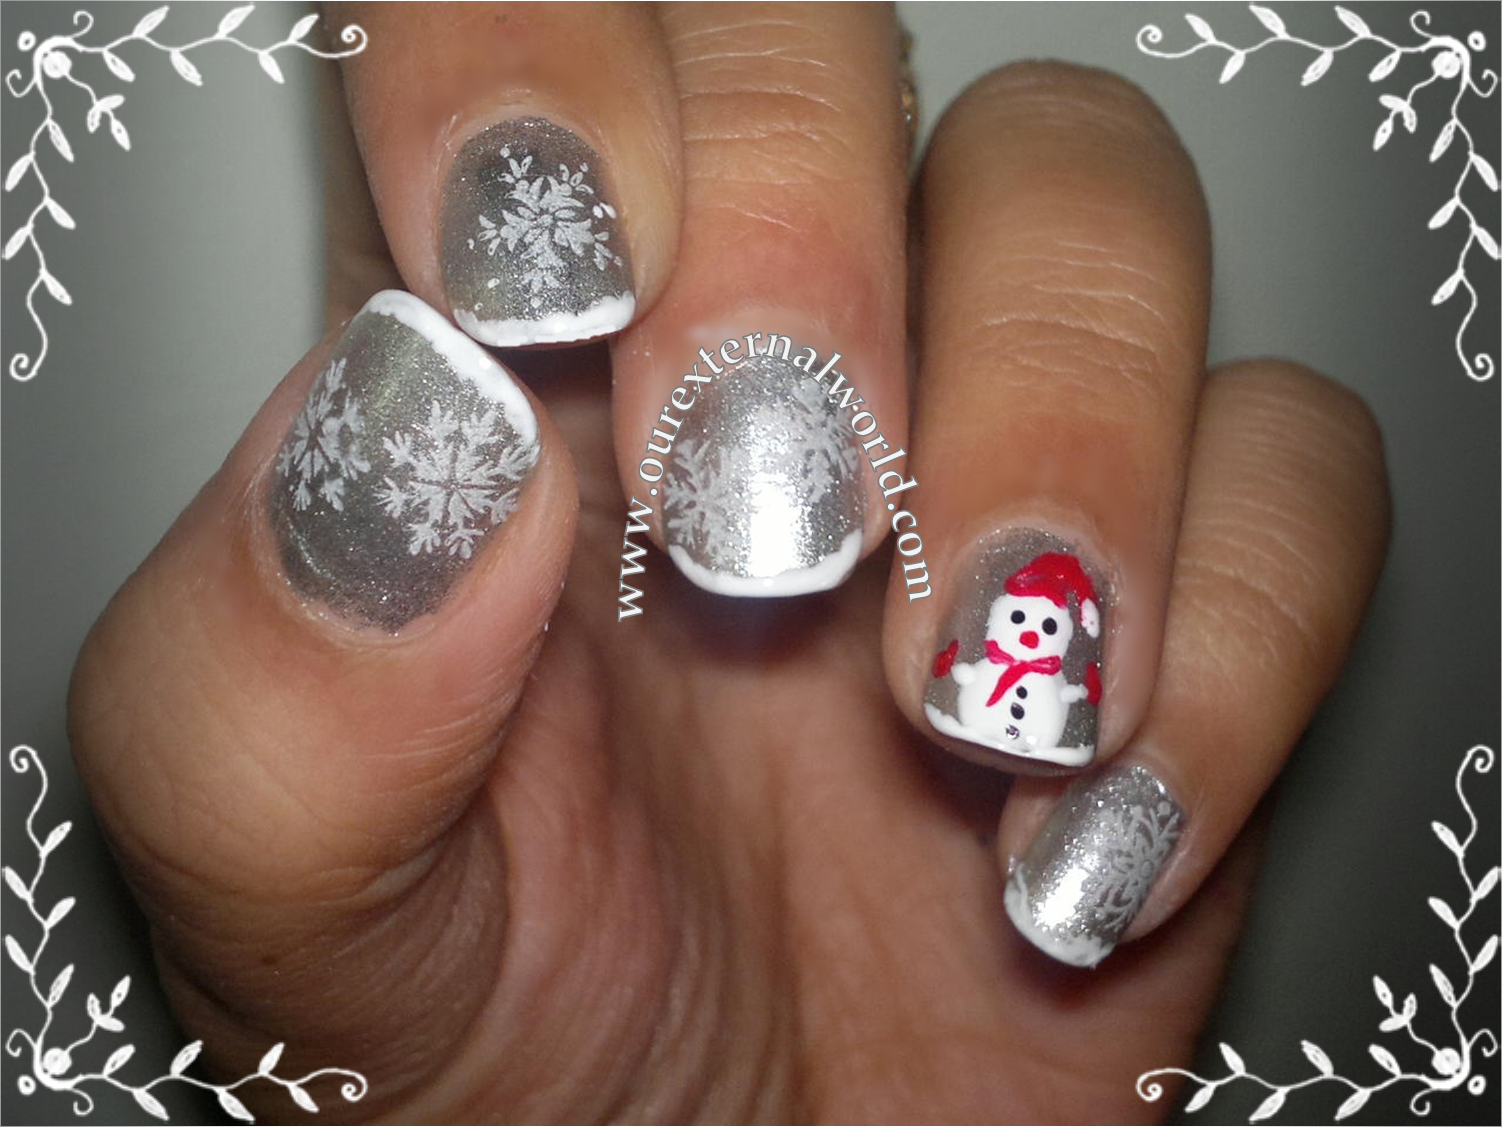 8. Frosty Snowman Nails - wide 3